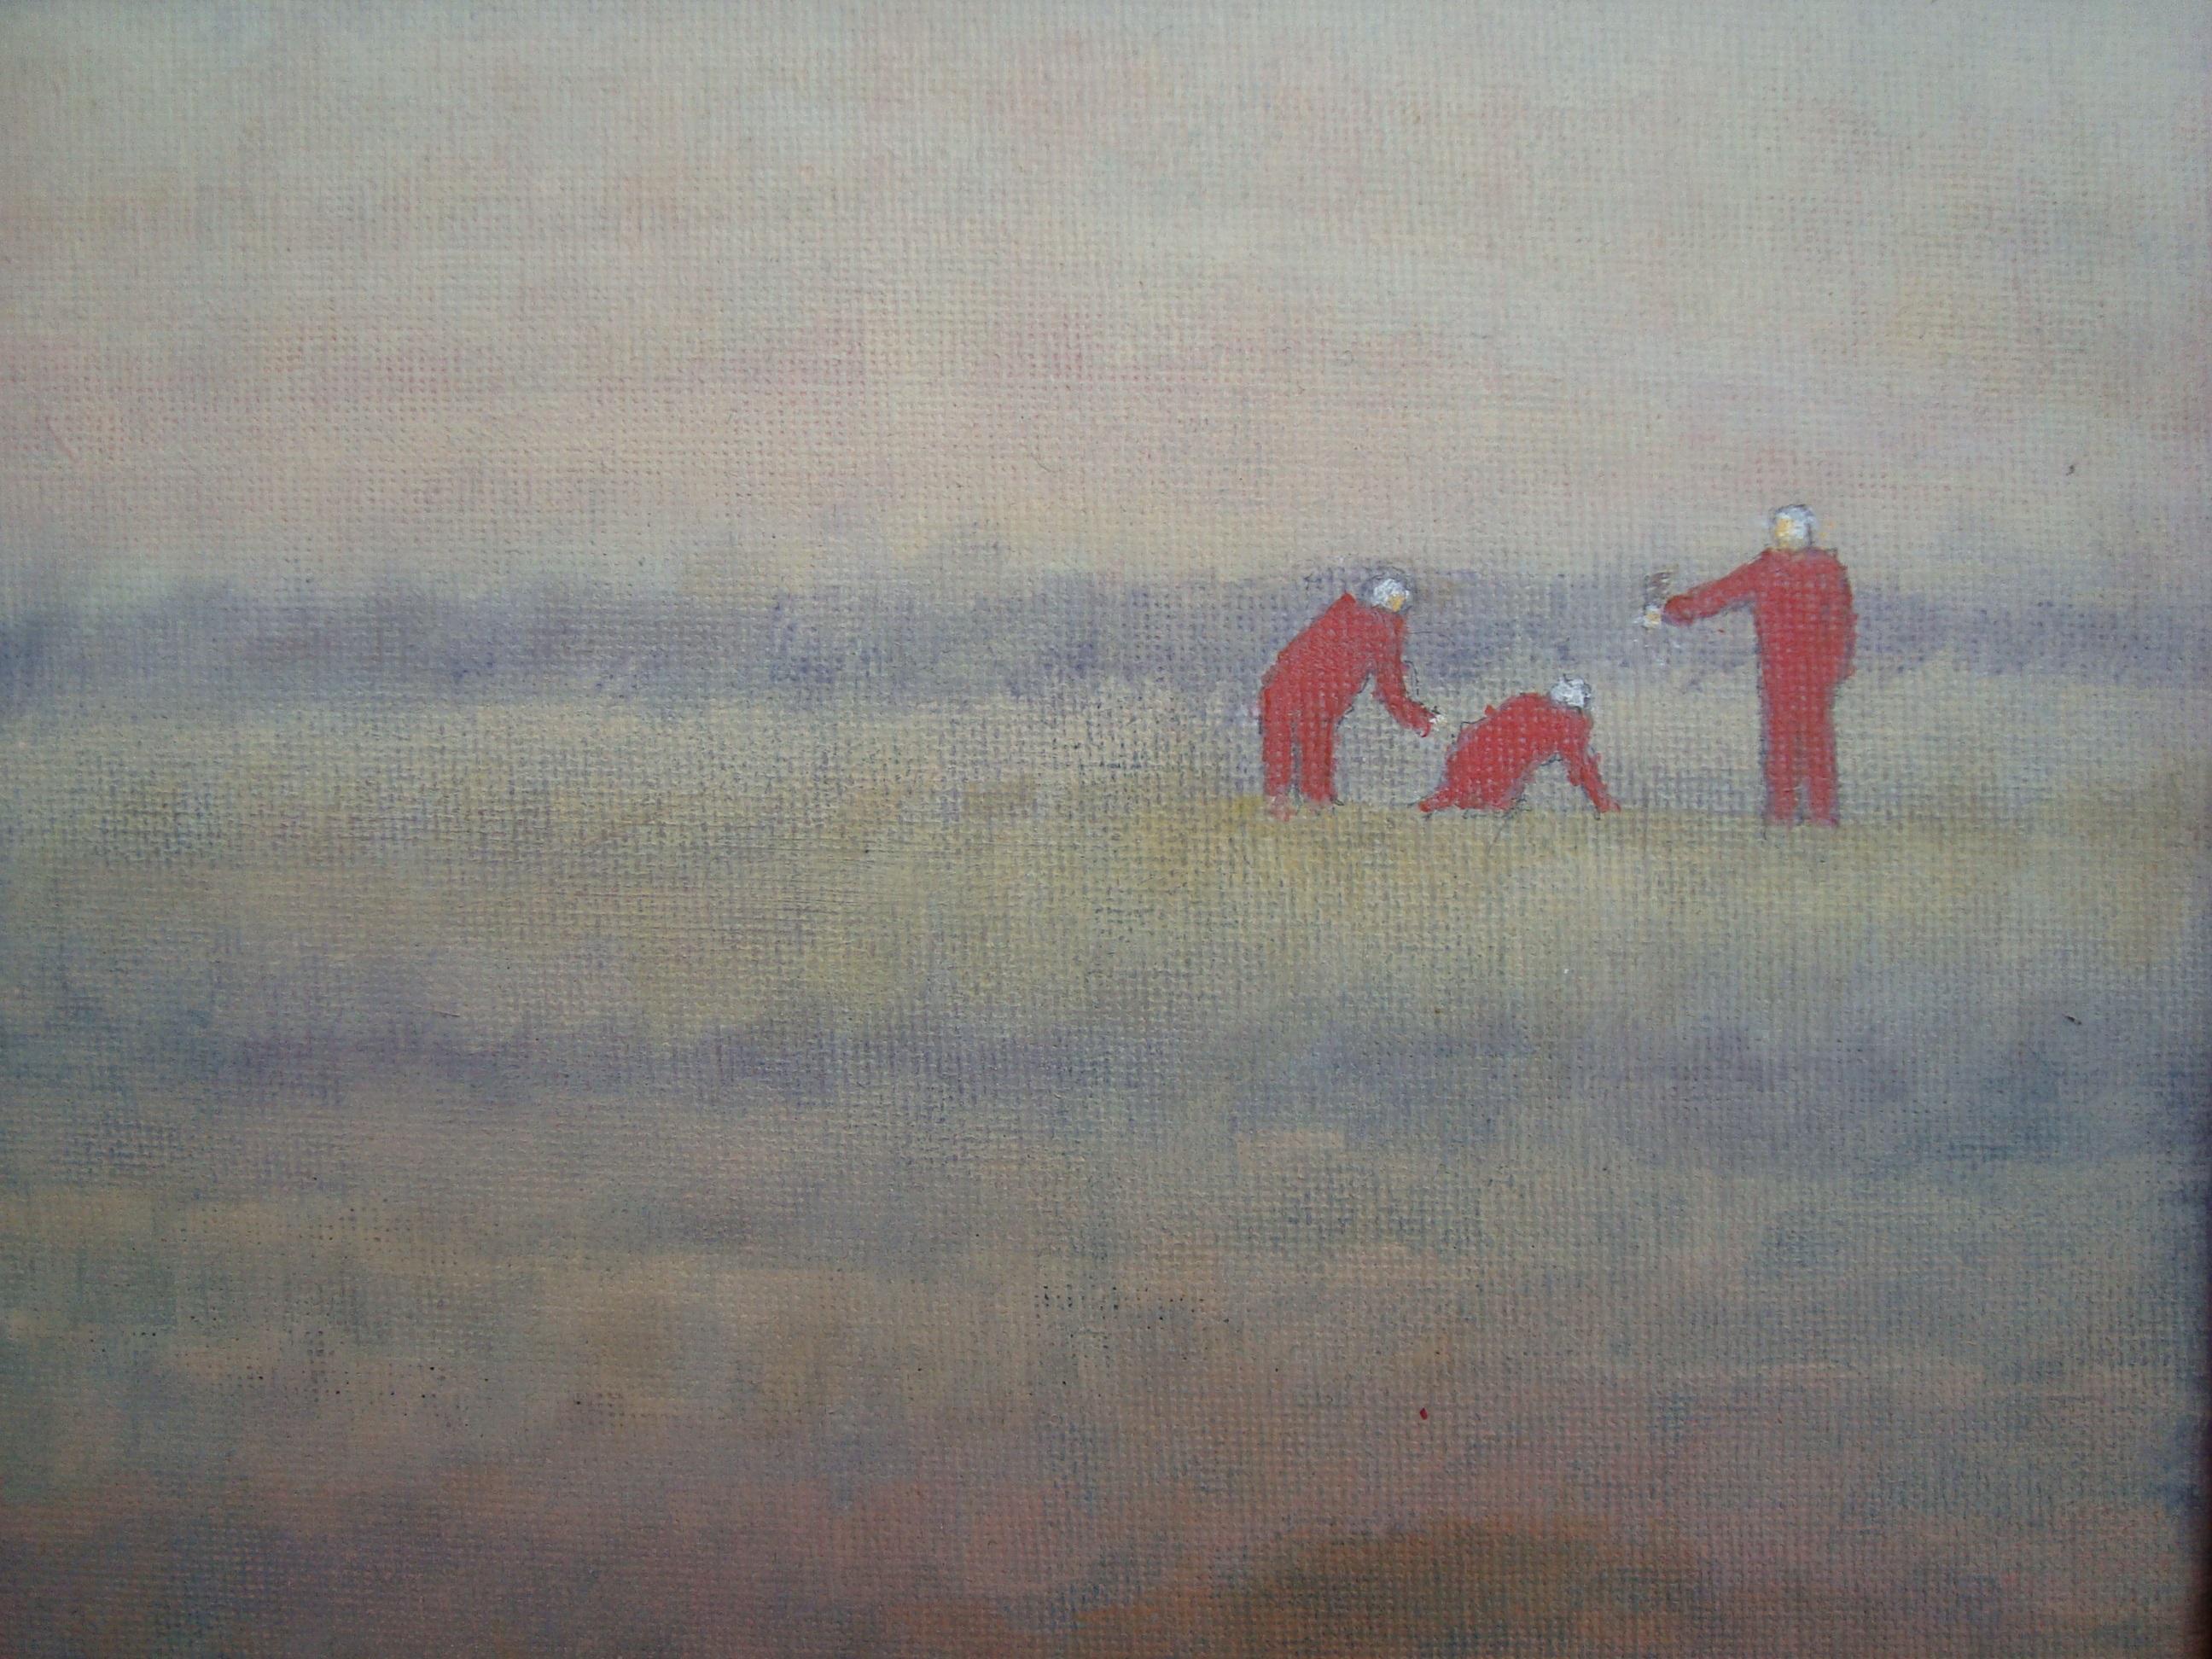 3 people digging in the field - Are they finding or hiding something? 

About the artist:

The paintings of Bjarne Dahl are realistic and figurative with inspiration from landscapes, people and buildings. The colors are often subdued, with a